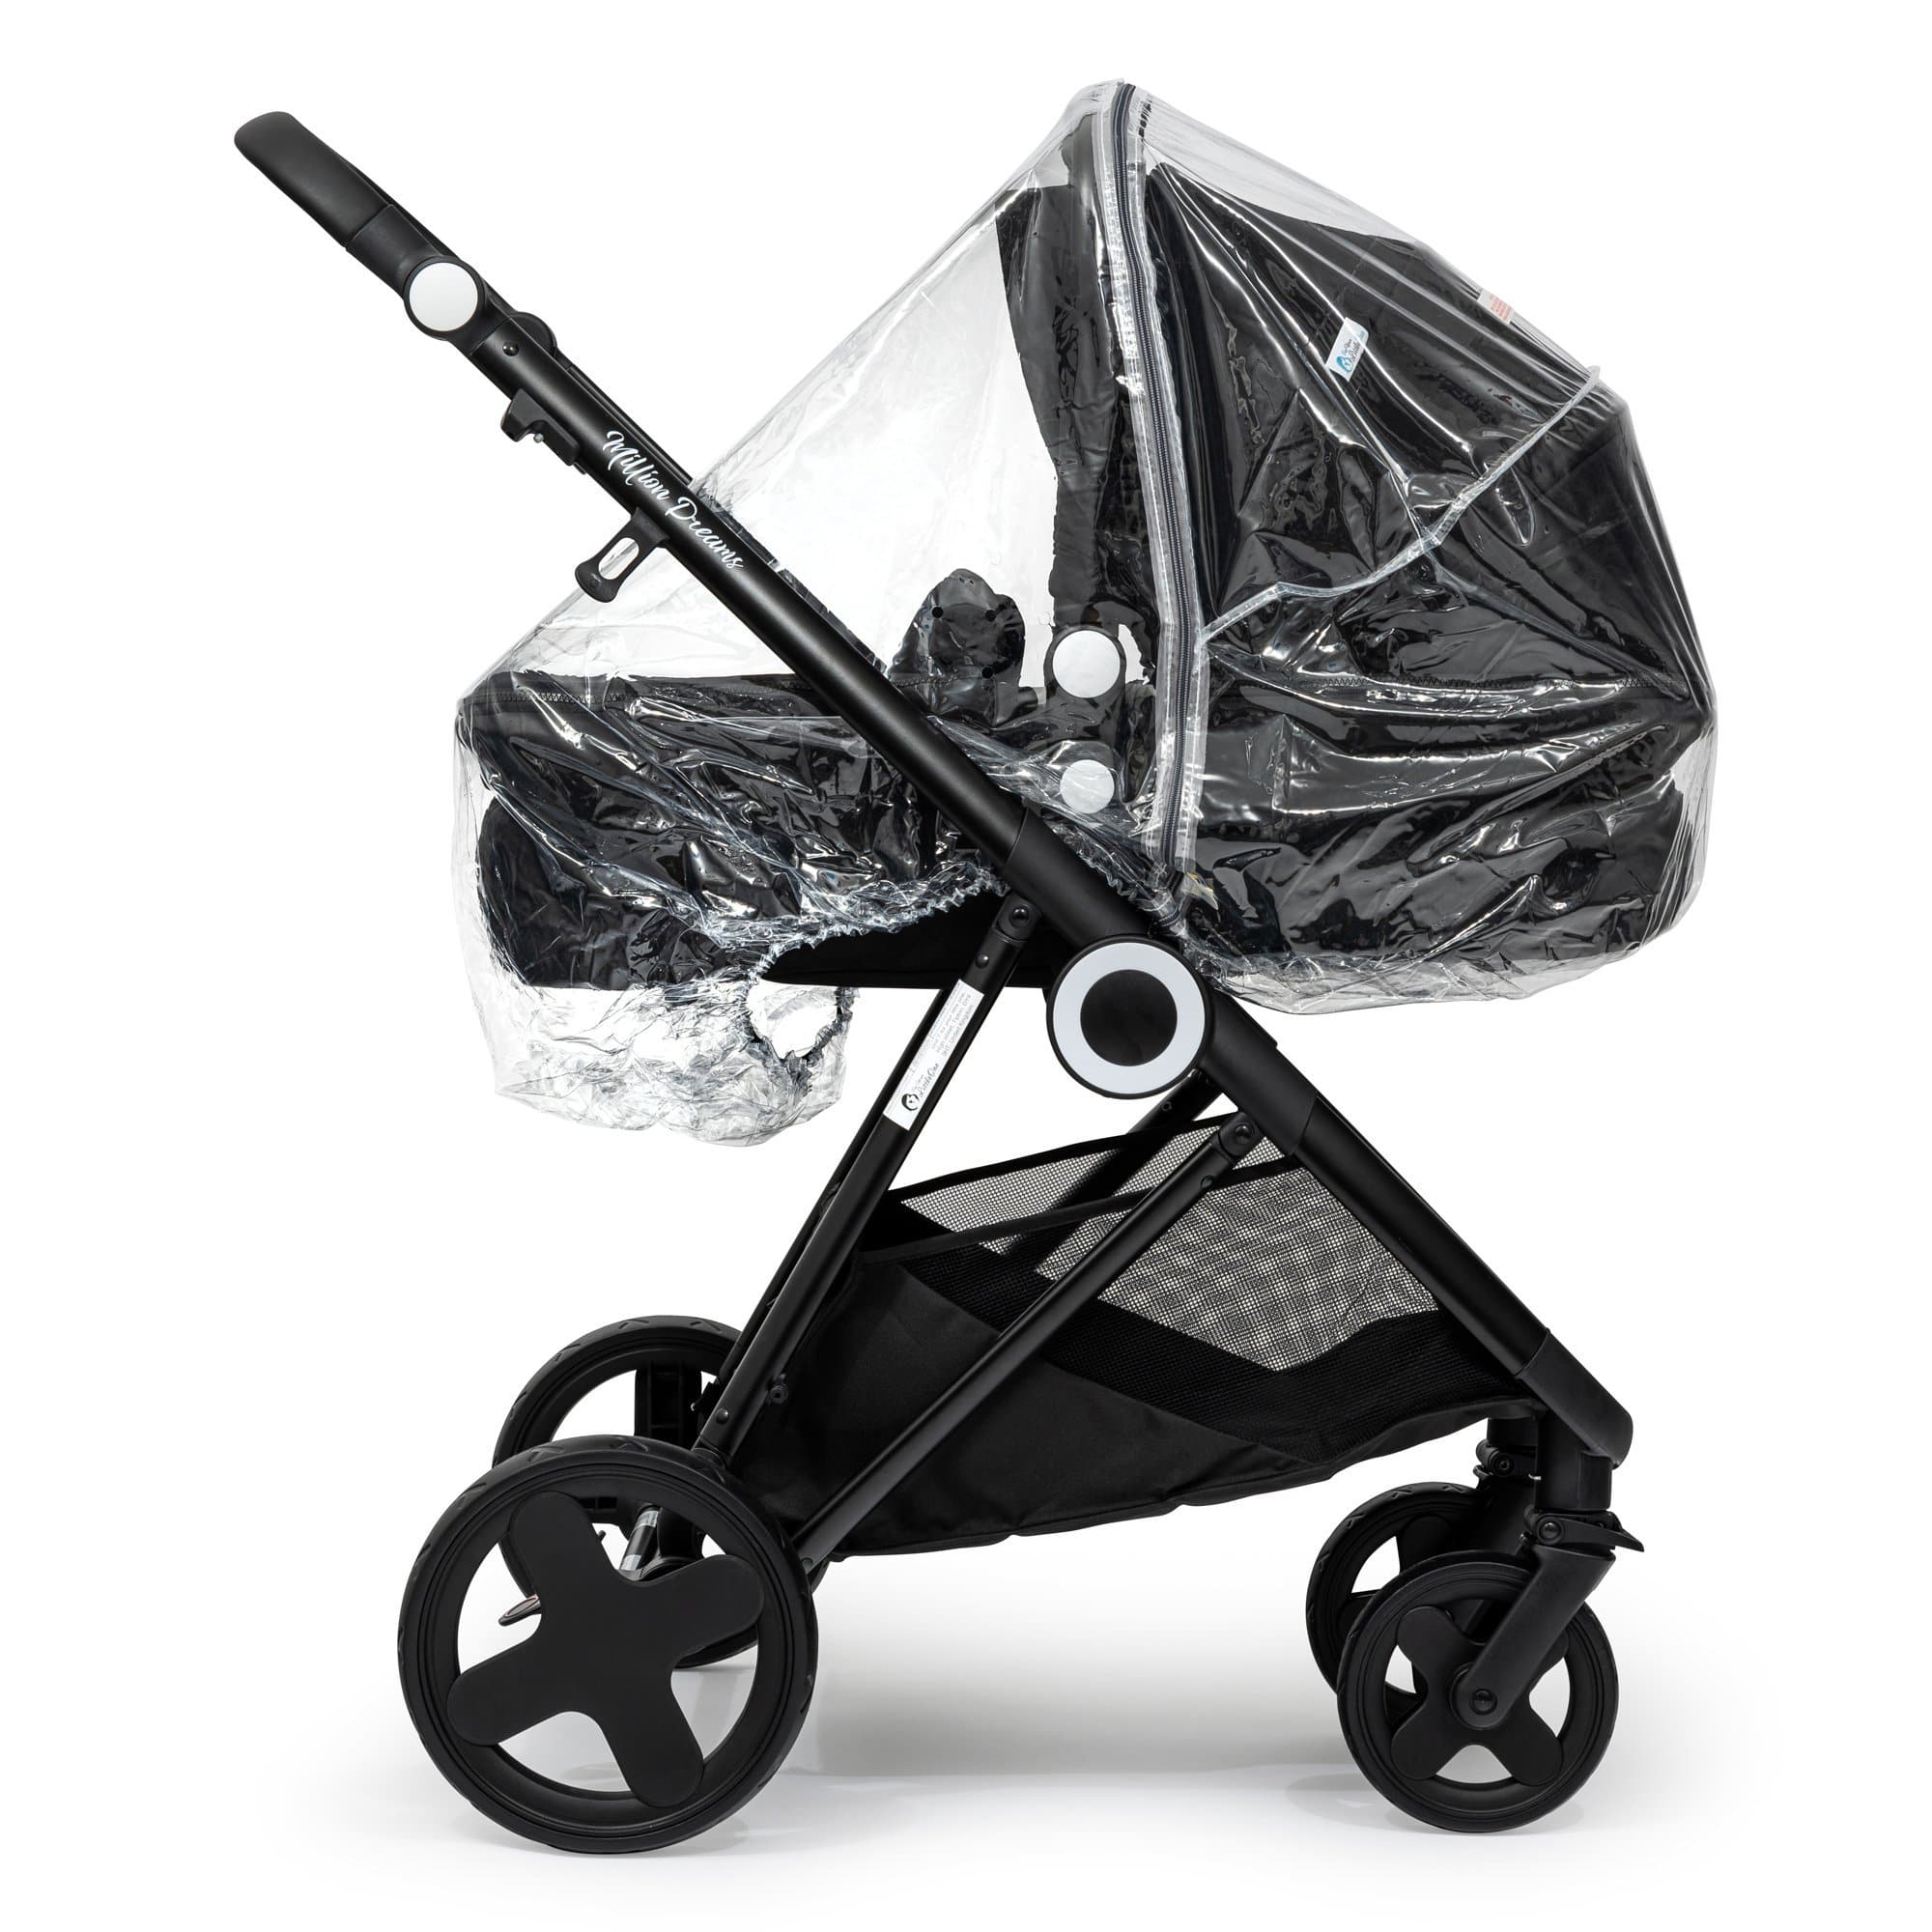 2 in 1 Rain Cover Compatible with Koelstra - Fits All Models - For Your Little One